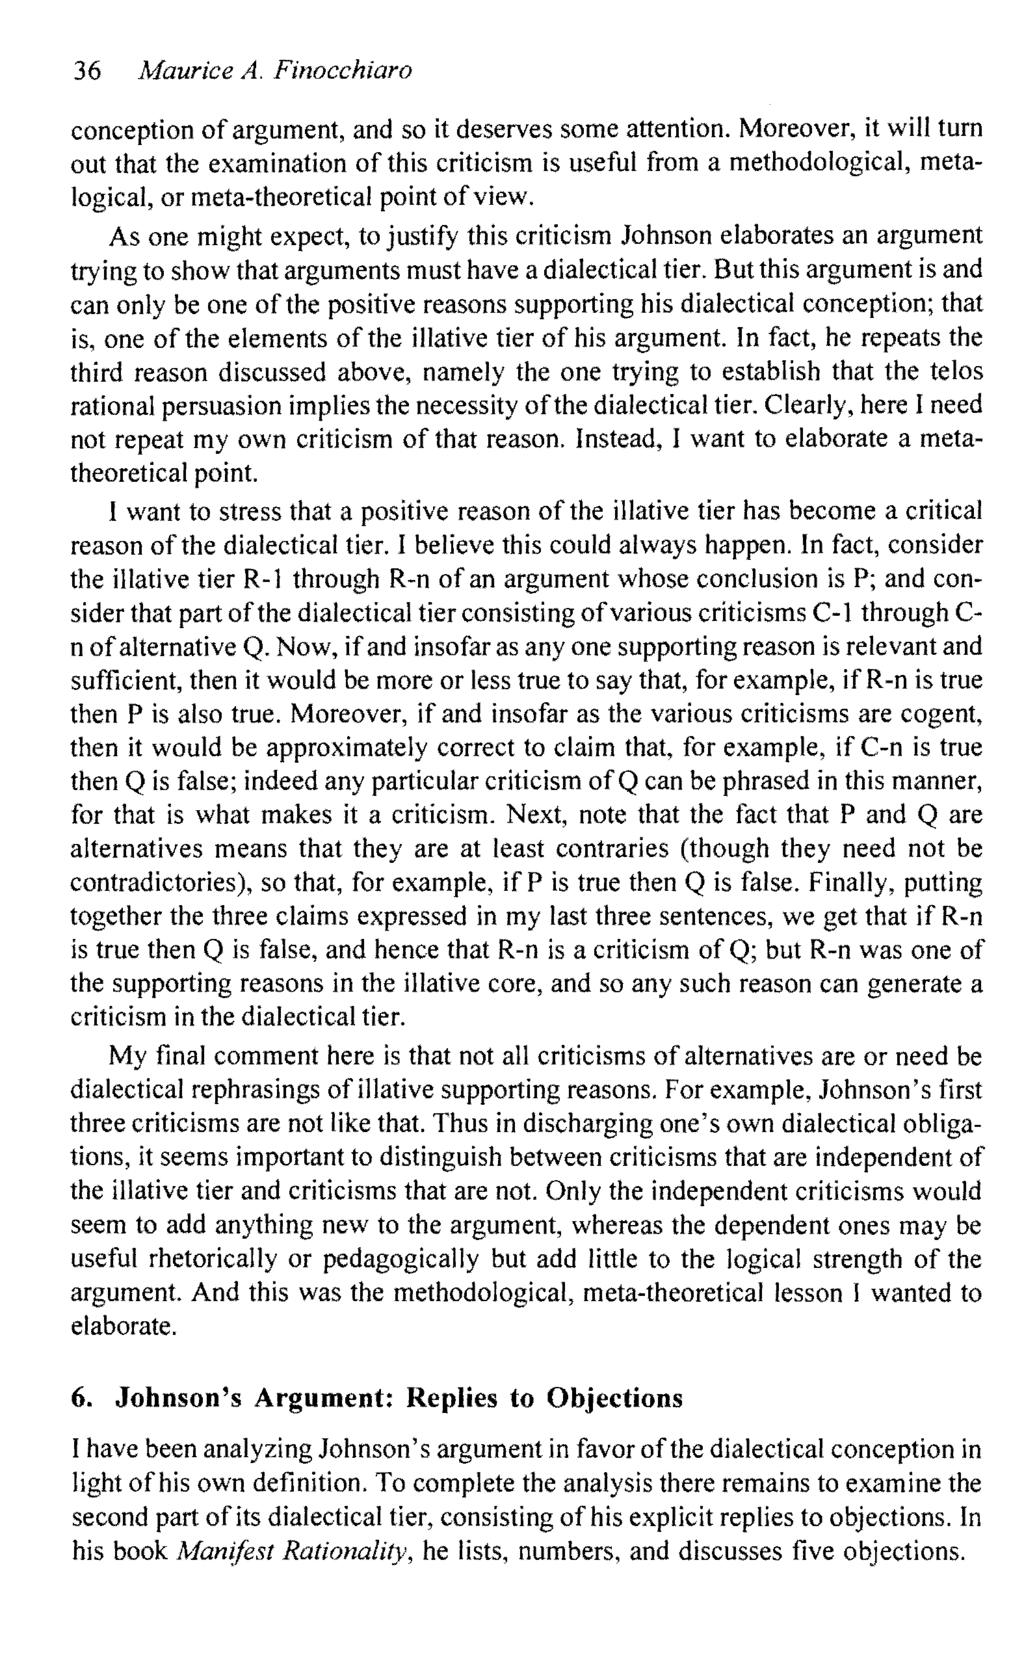 36 Maurice A. Finocchiaro conception of argument, and so it deserves some attention.